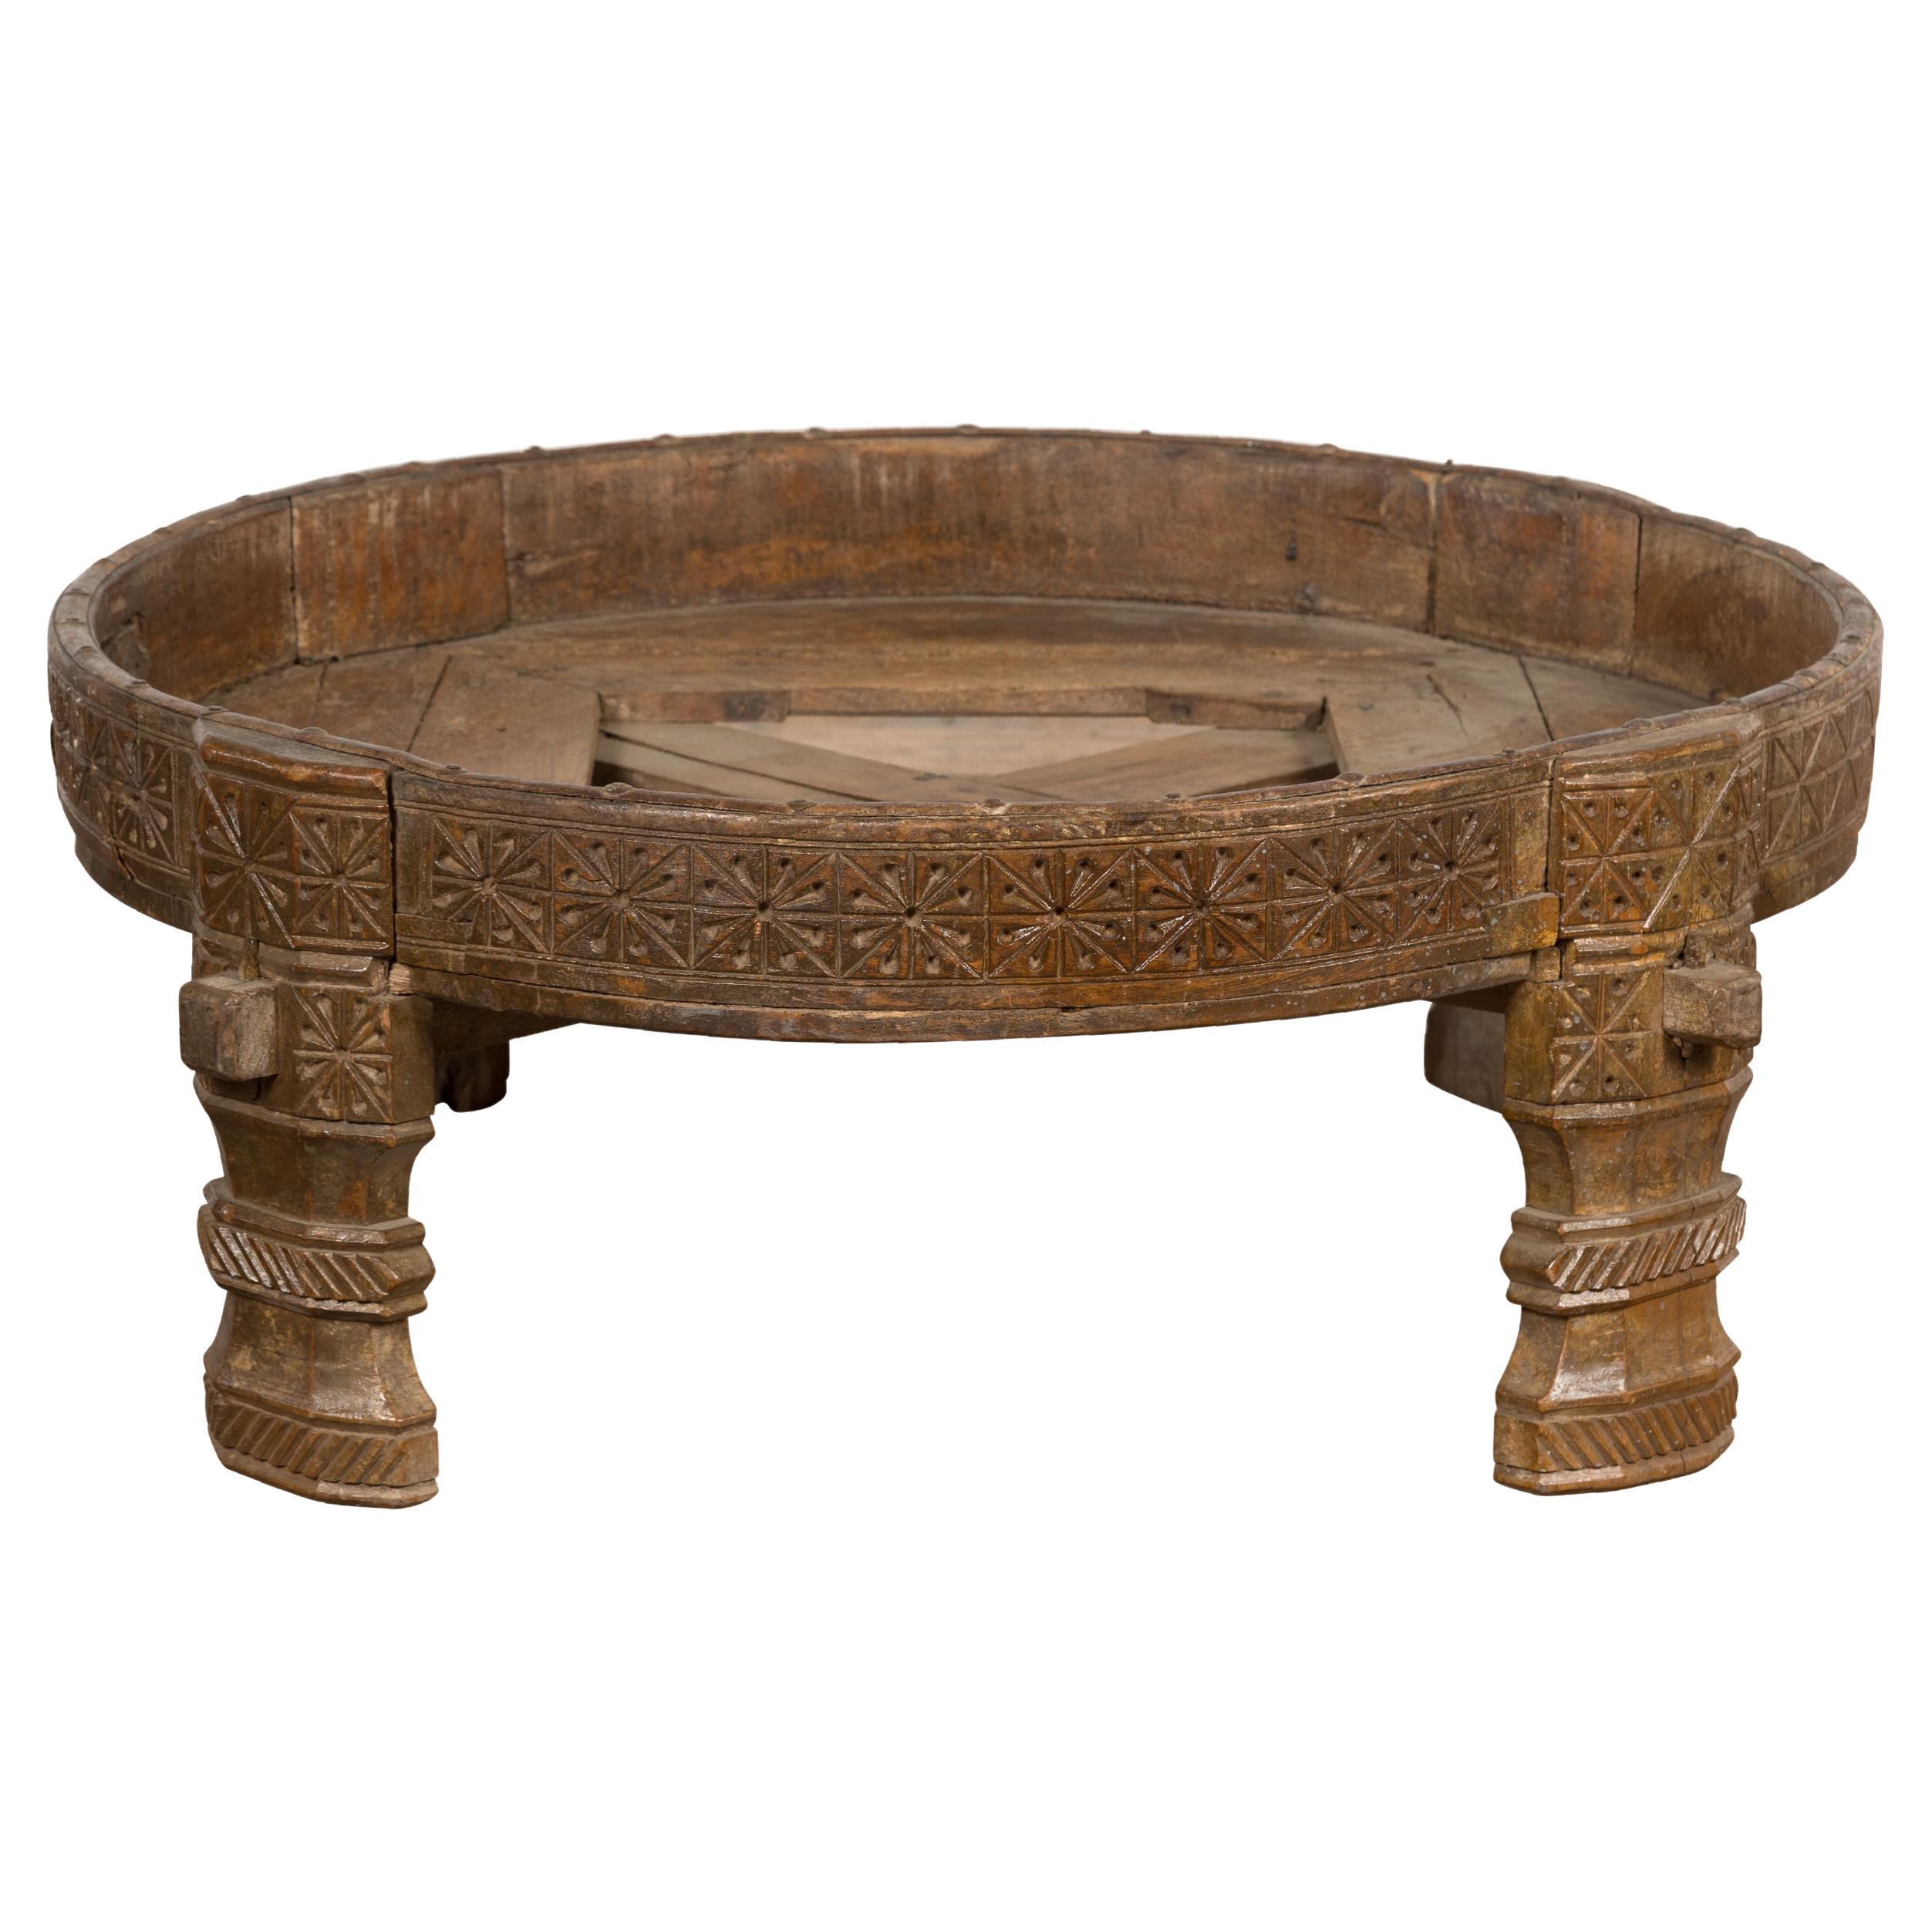 1920s Indian Antique Chakki Grinding Table with Hand-Carved Geometric Décor For Sale